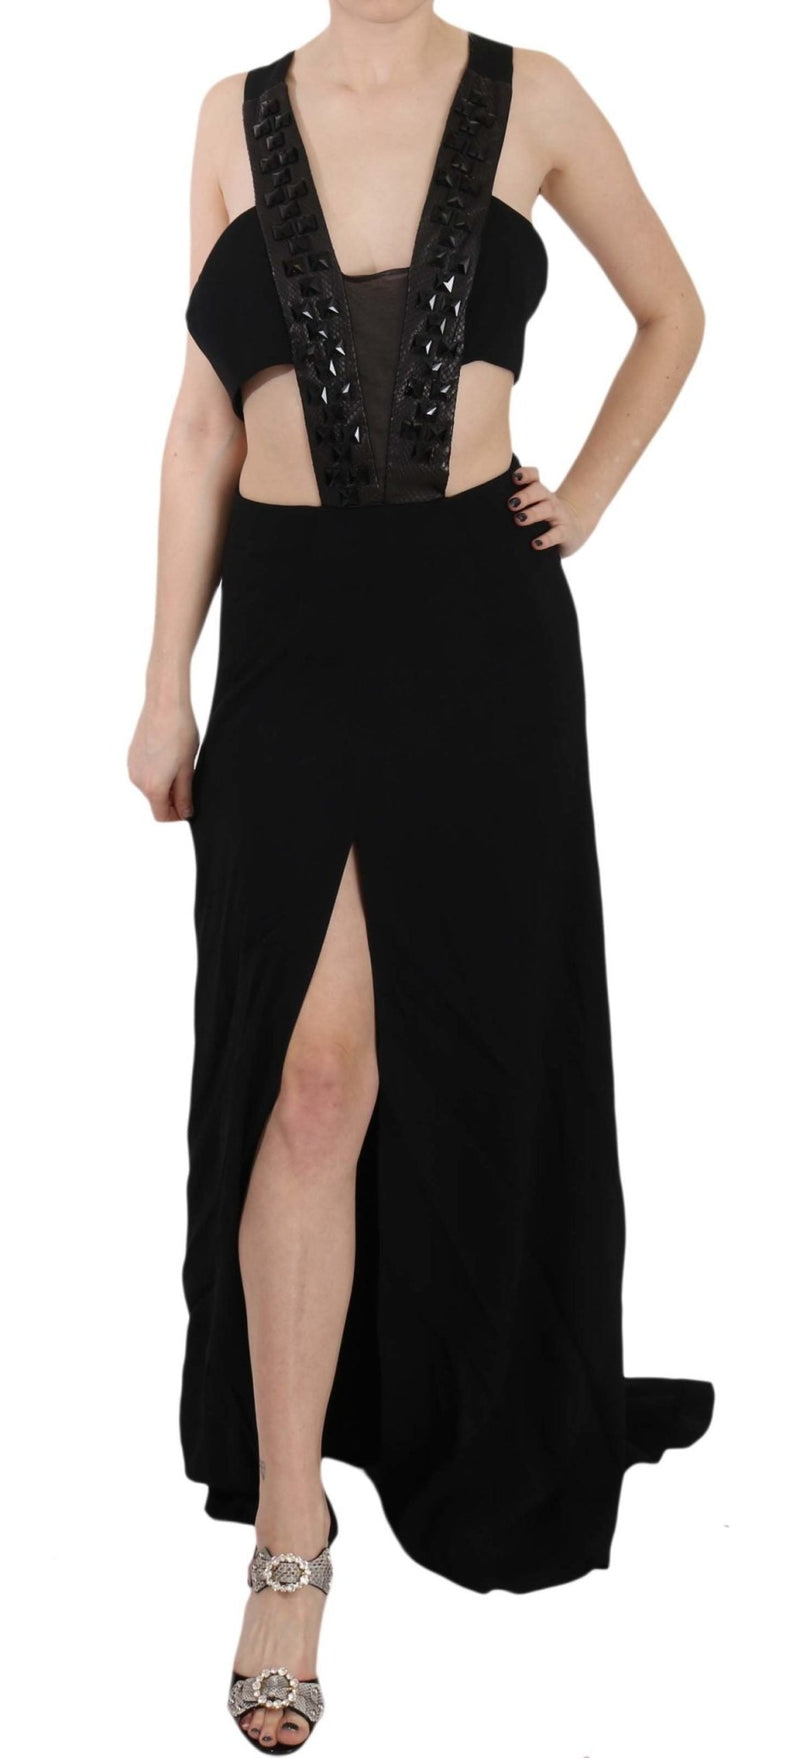 Black Crystal Leather Gown Flare Dress - Avaz Shop